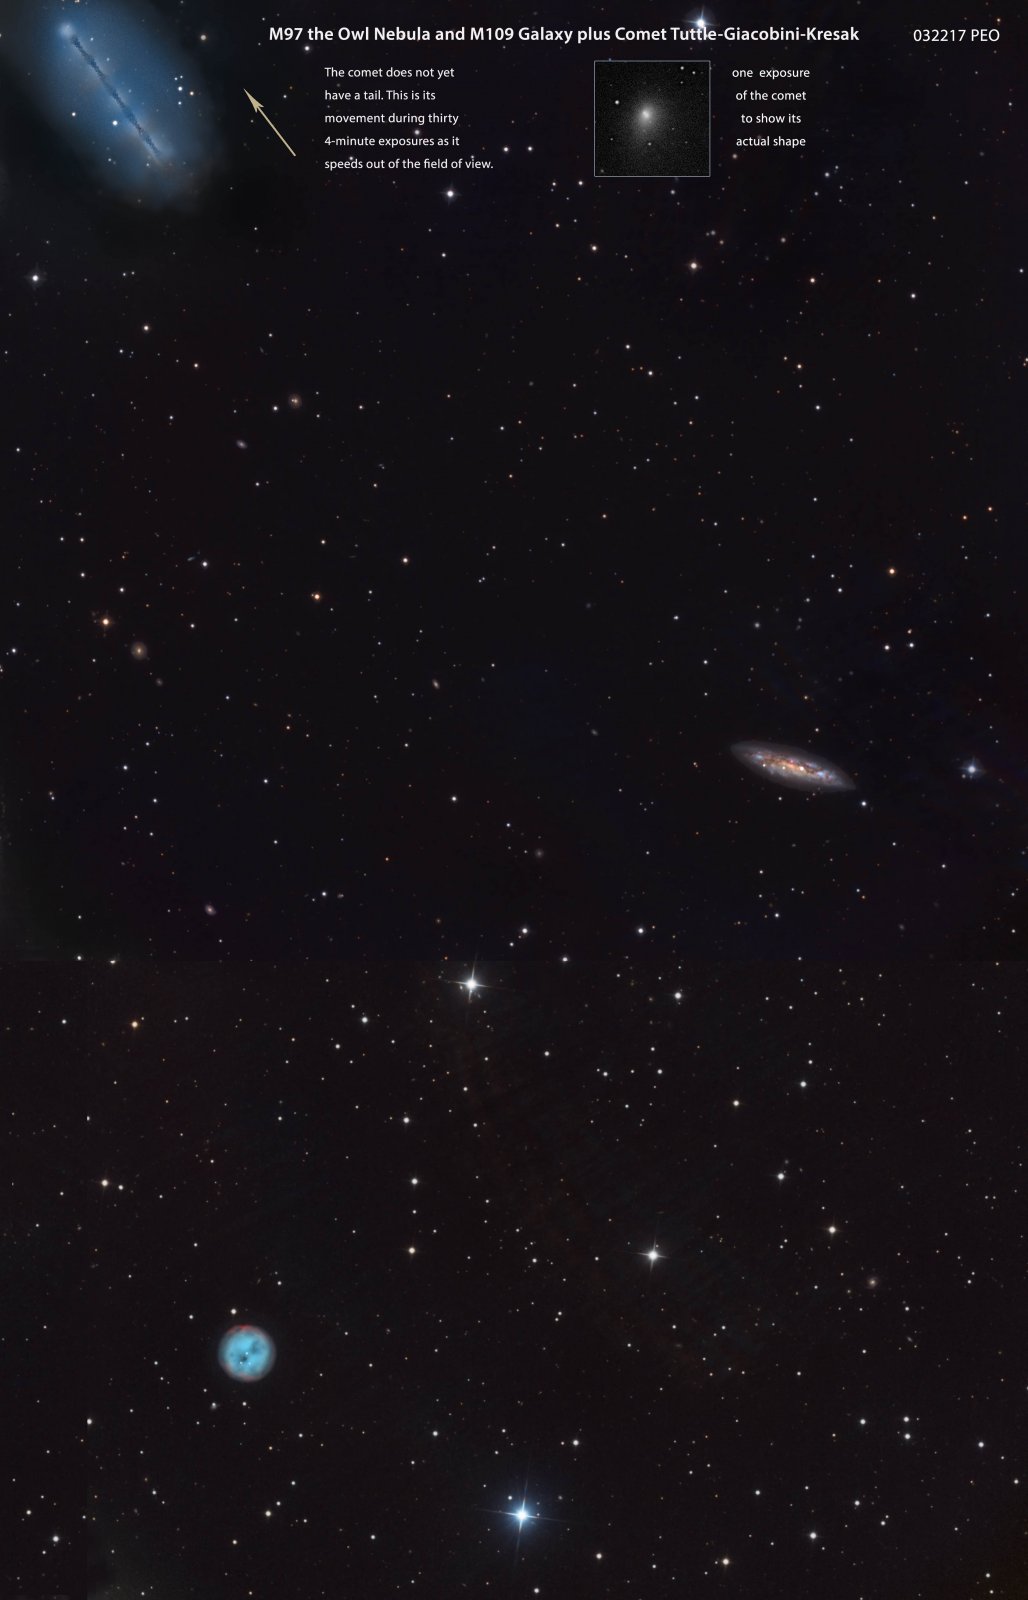 Comet Tuttle GK, M97 and M108